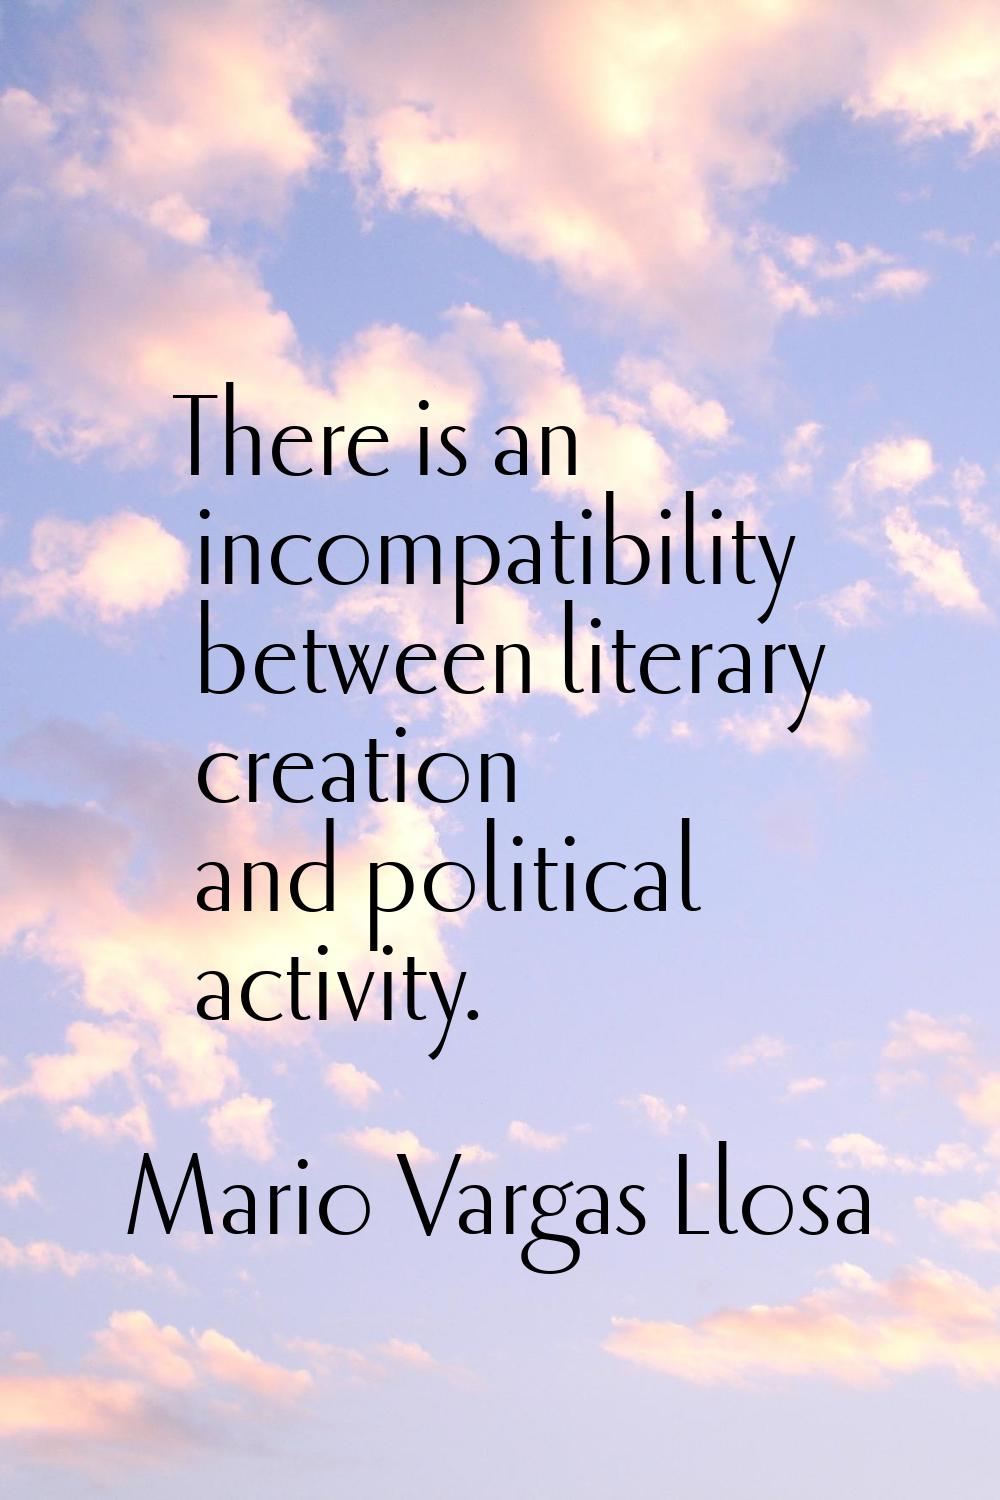 There is an incompatibility between literary creation and political activity.